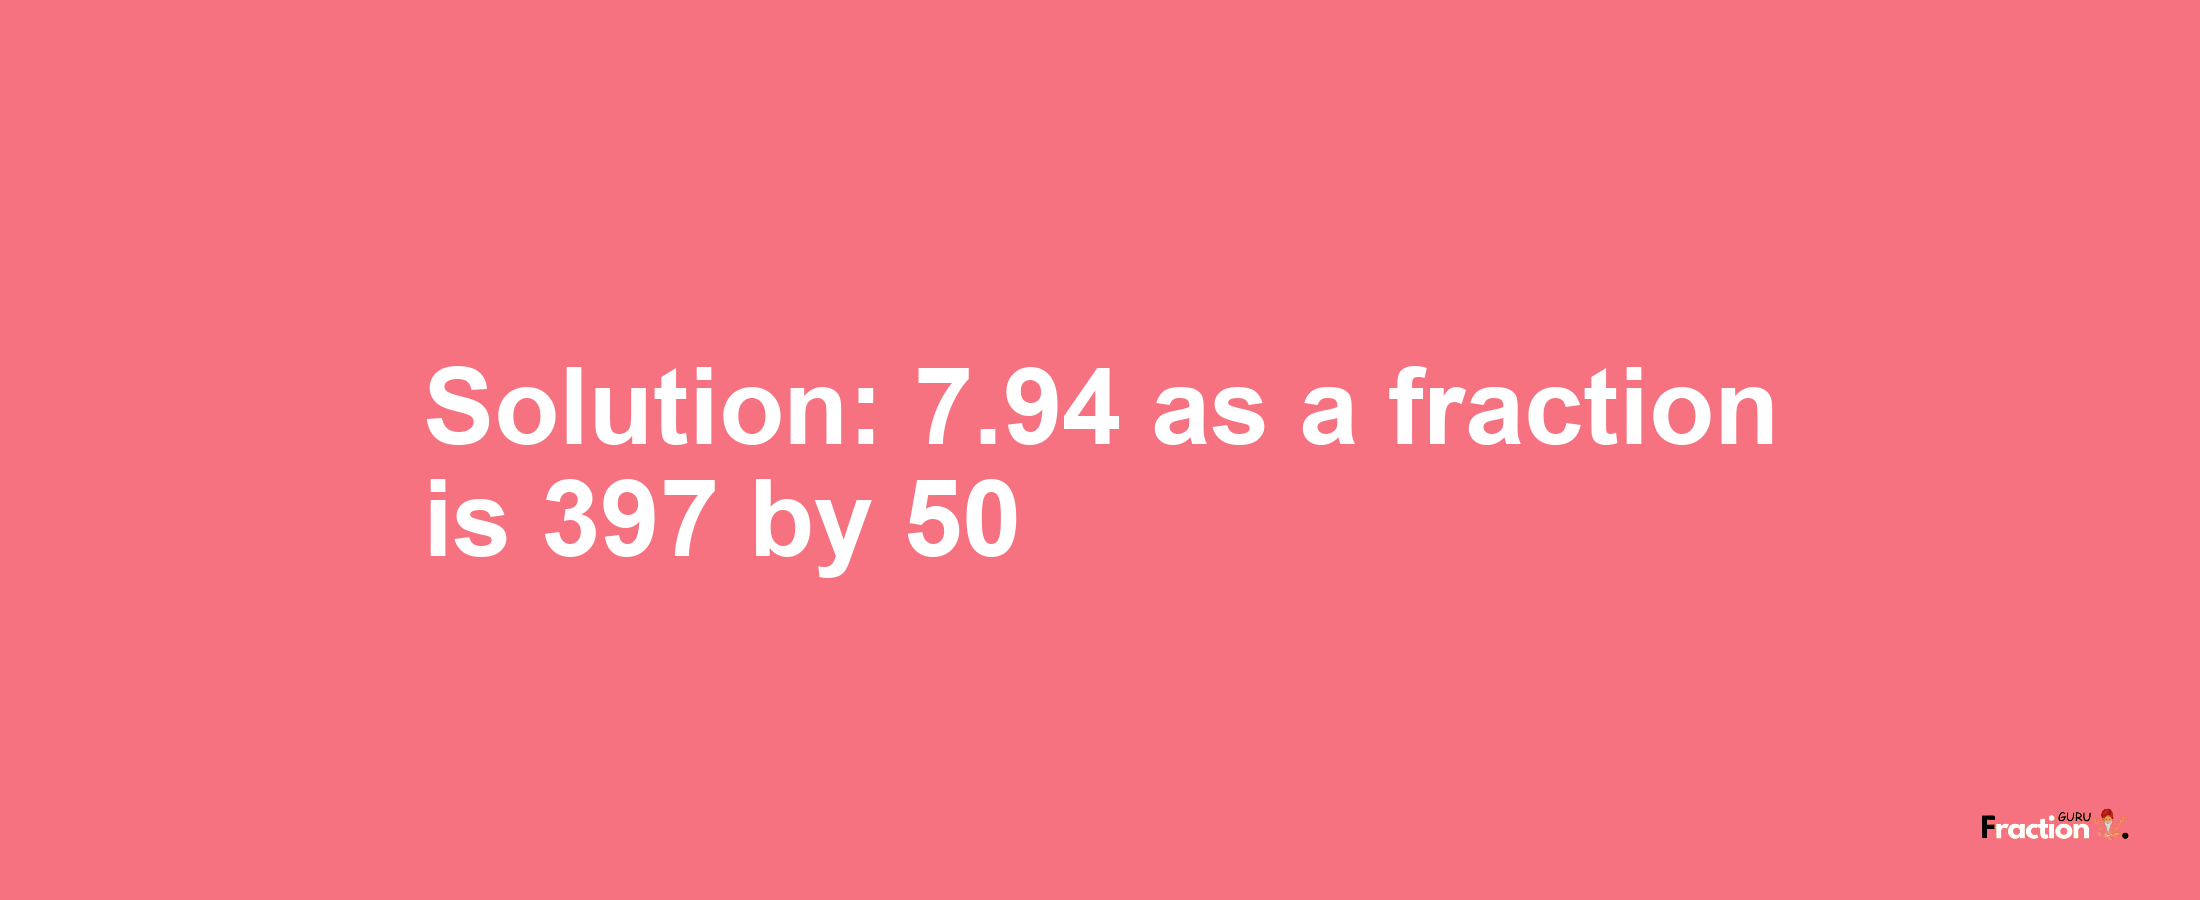 Solution:7.94 as a fraction is 397/50